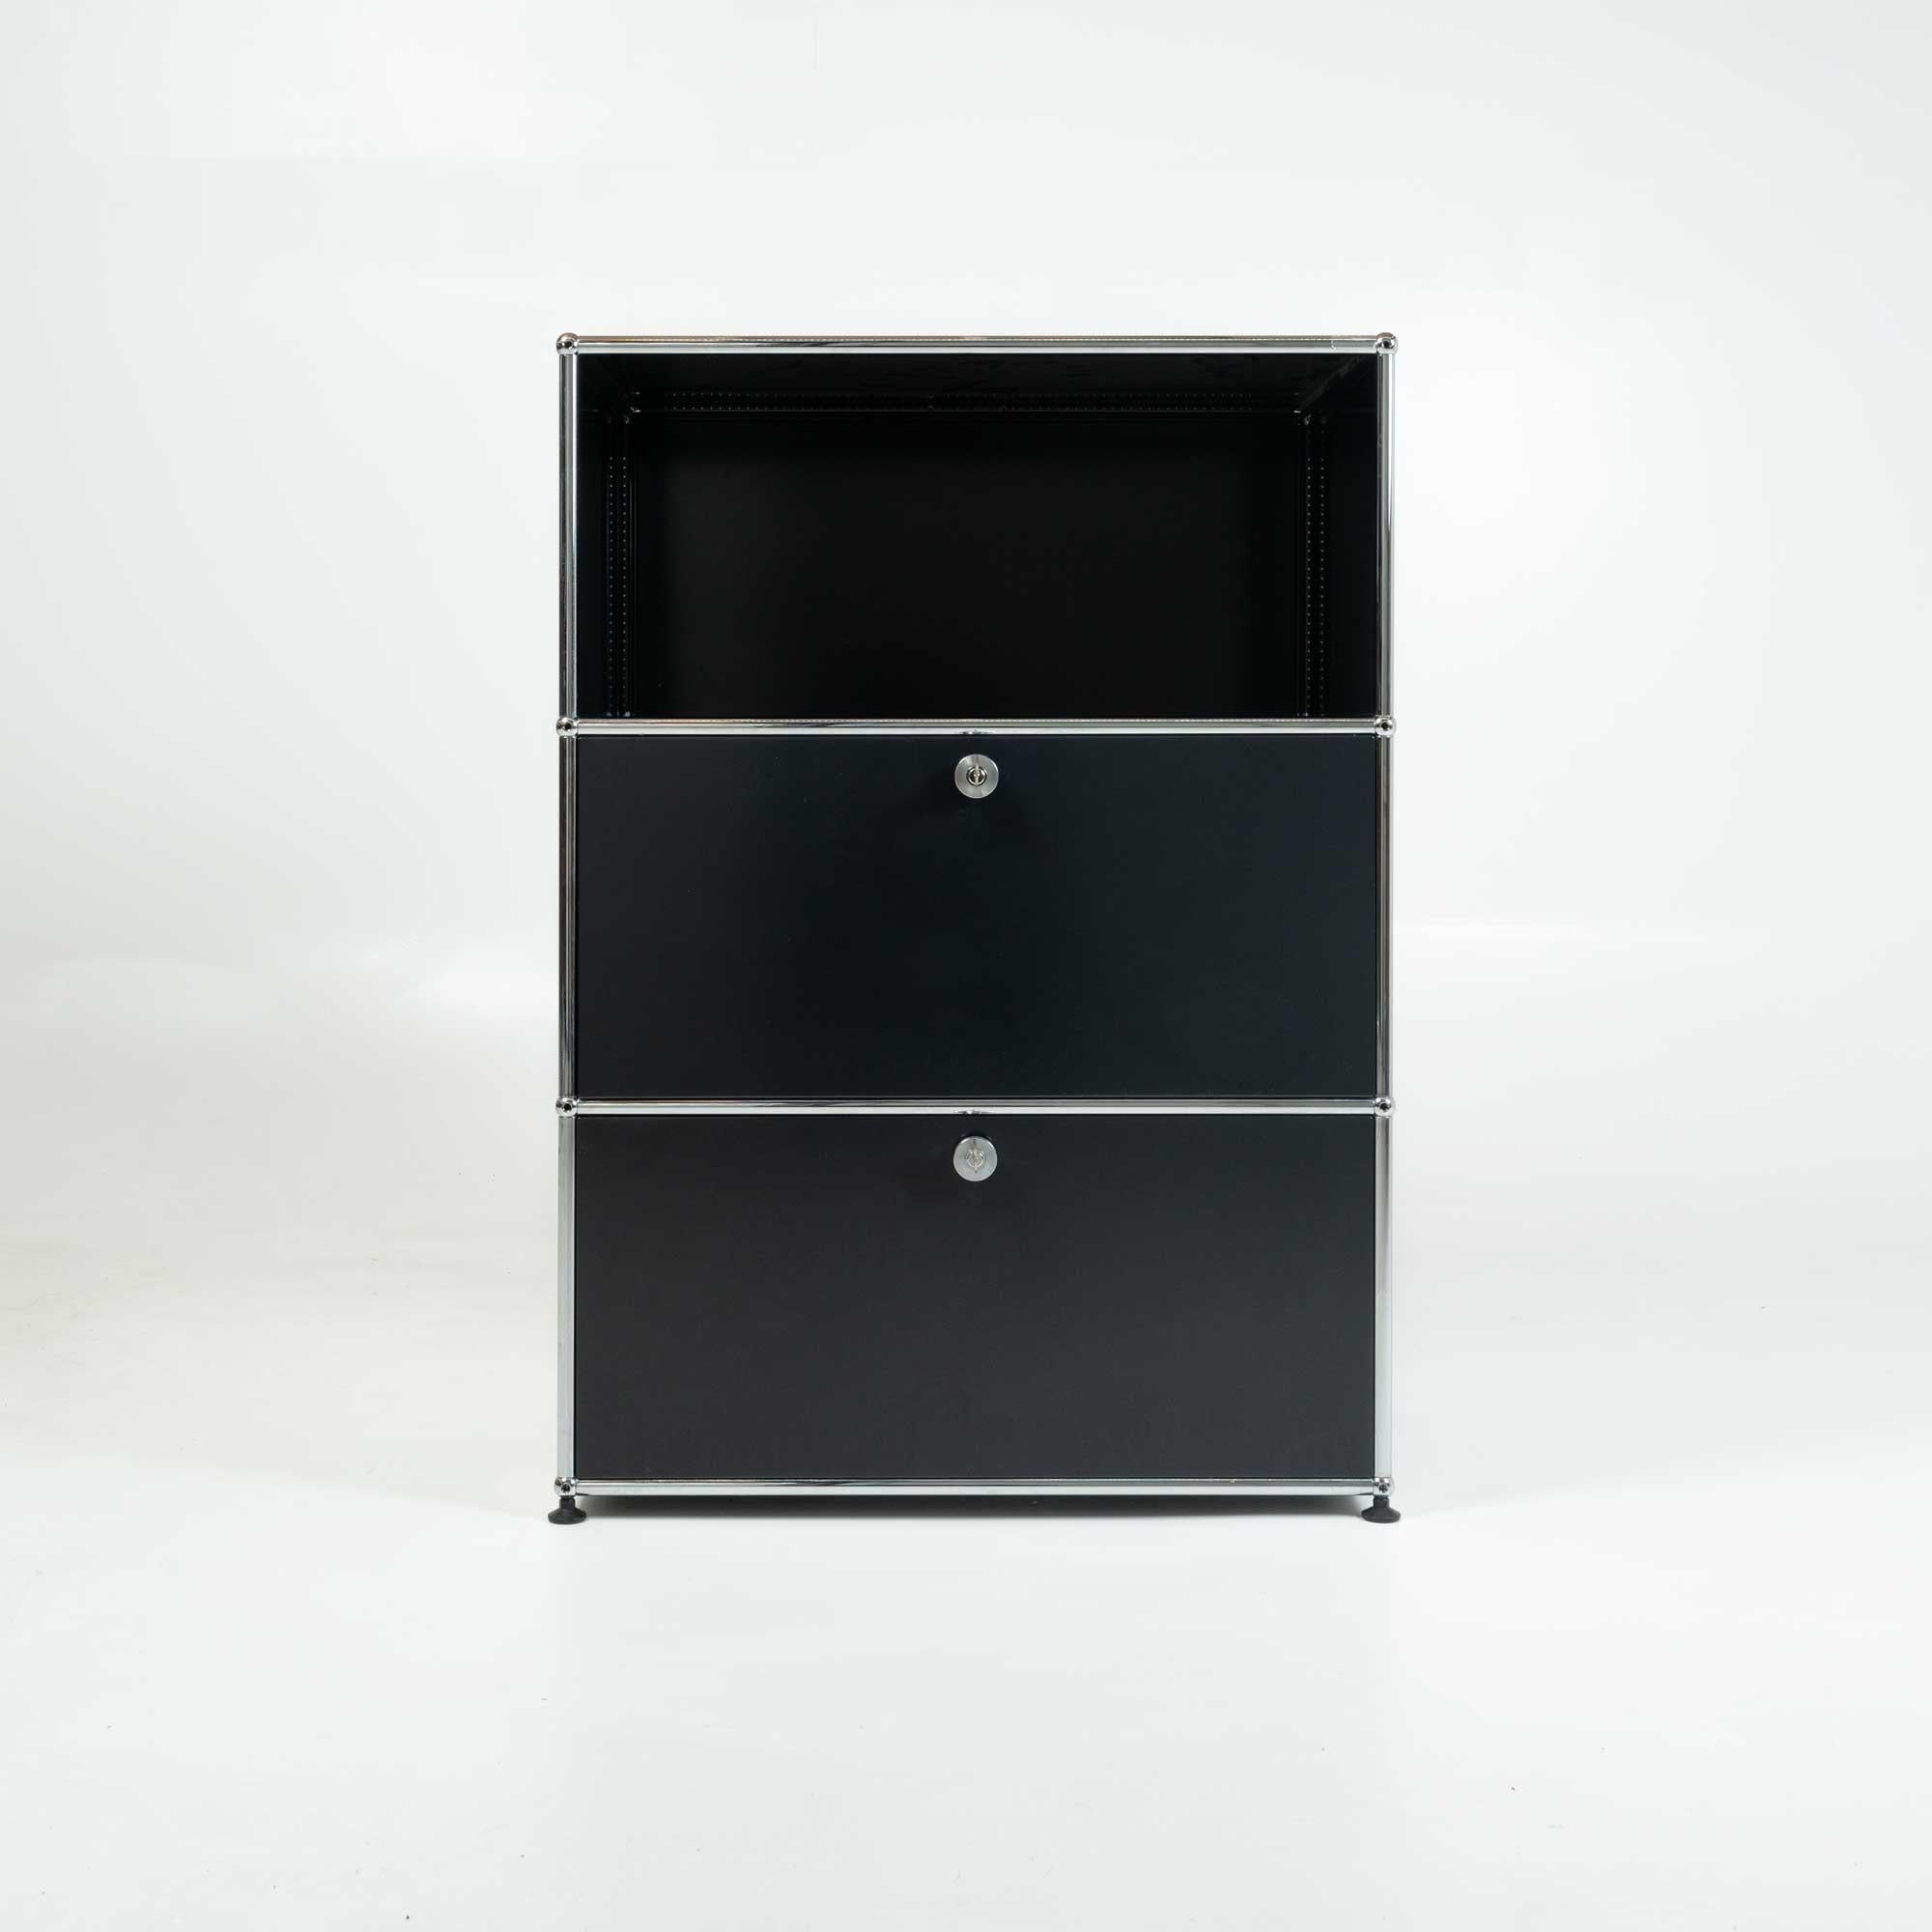 This is a modular USM Haller single column cabinet in Graphite Black, made in Switzerland, in overall good condition, some wears and scratches on the surface. In overall good condition, ready to be used. 

This unit has 2 drawers with soft close